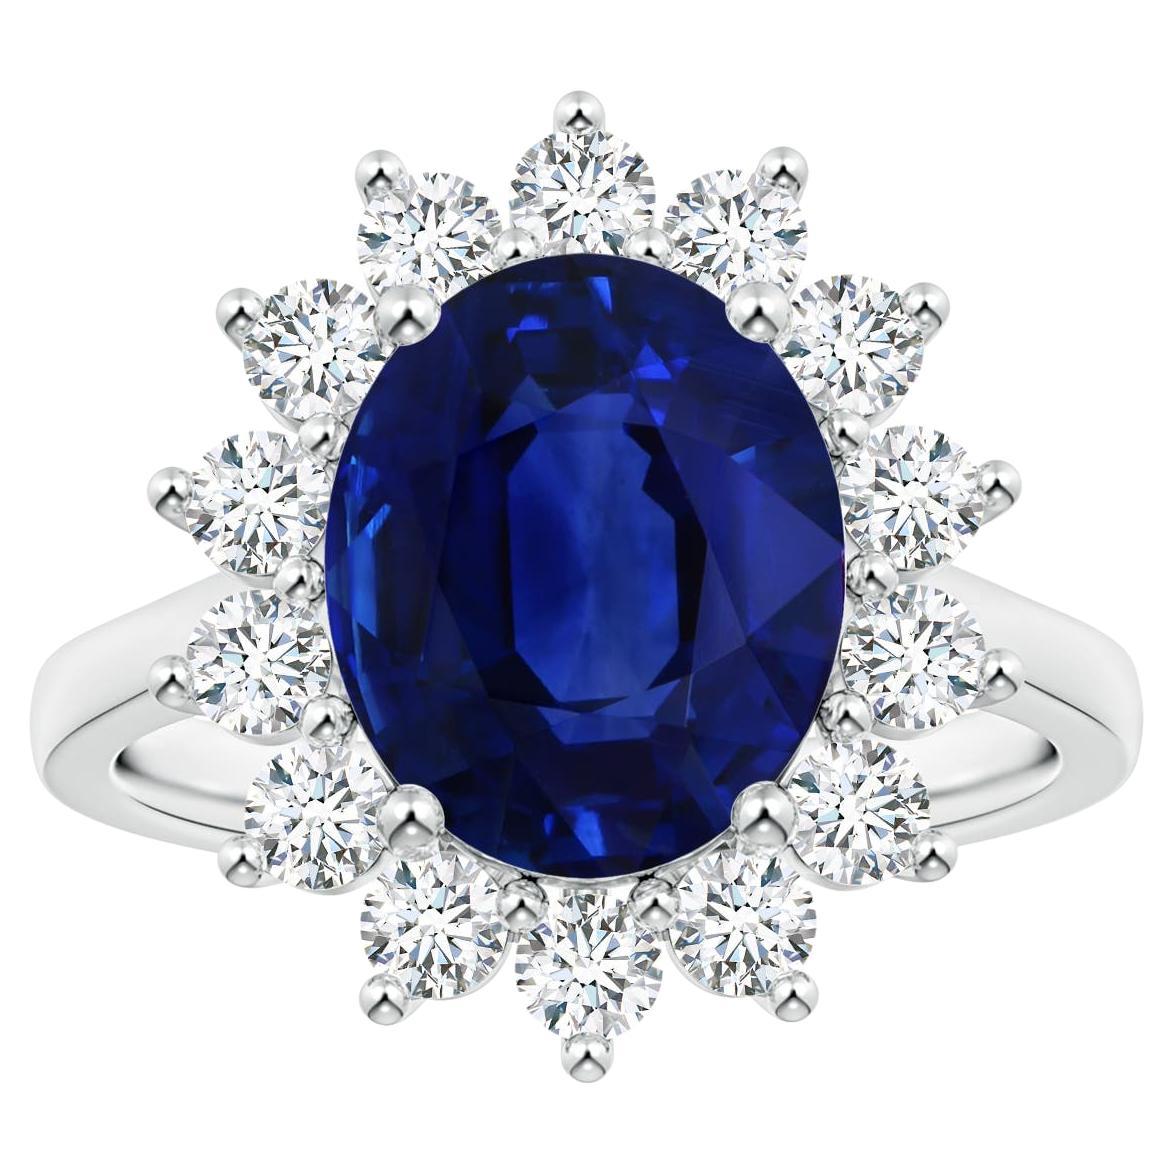 For Sale:  ANGARA Princess Diana Inspired GIA Certified Sapphire Halo Ring in White Gold